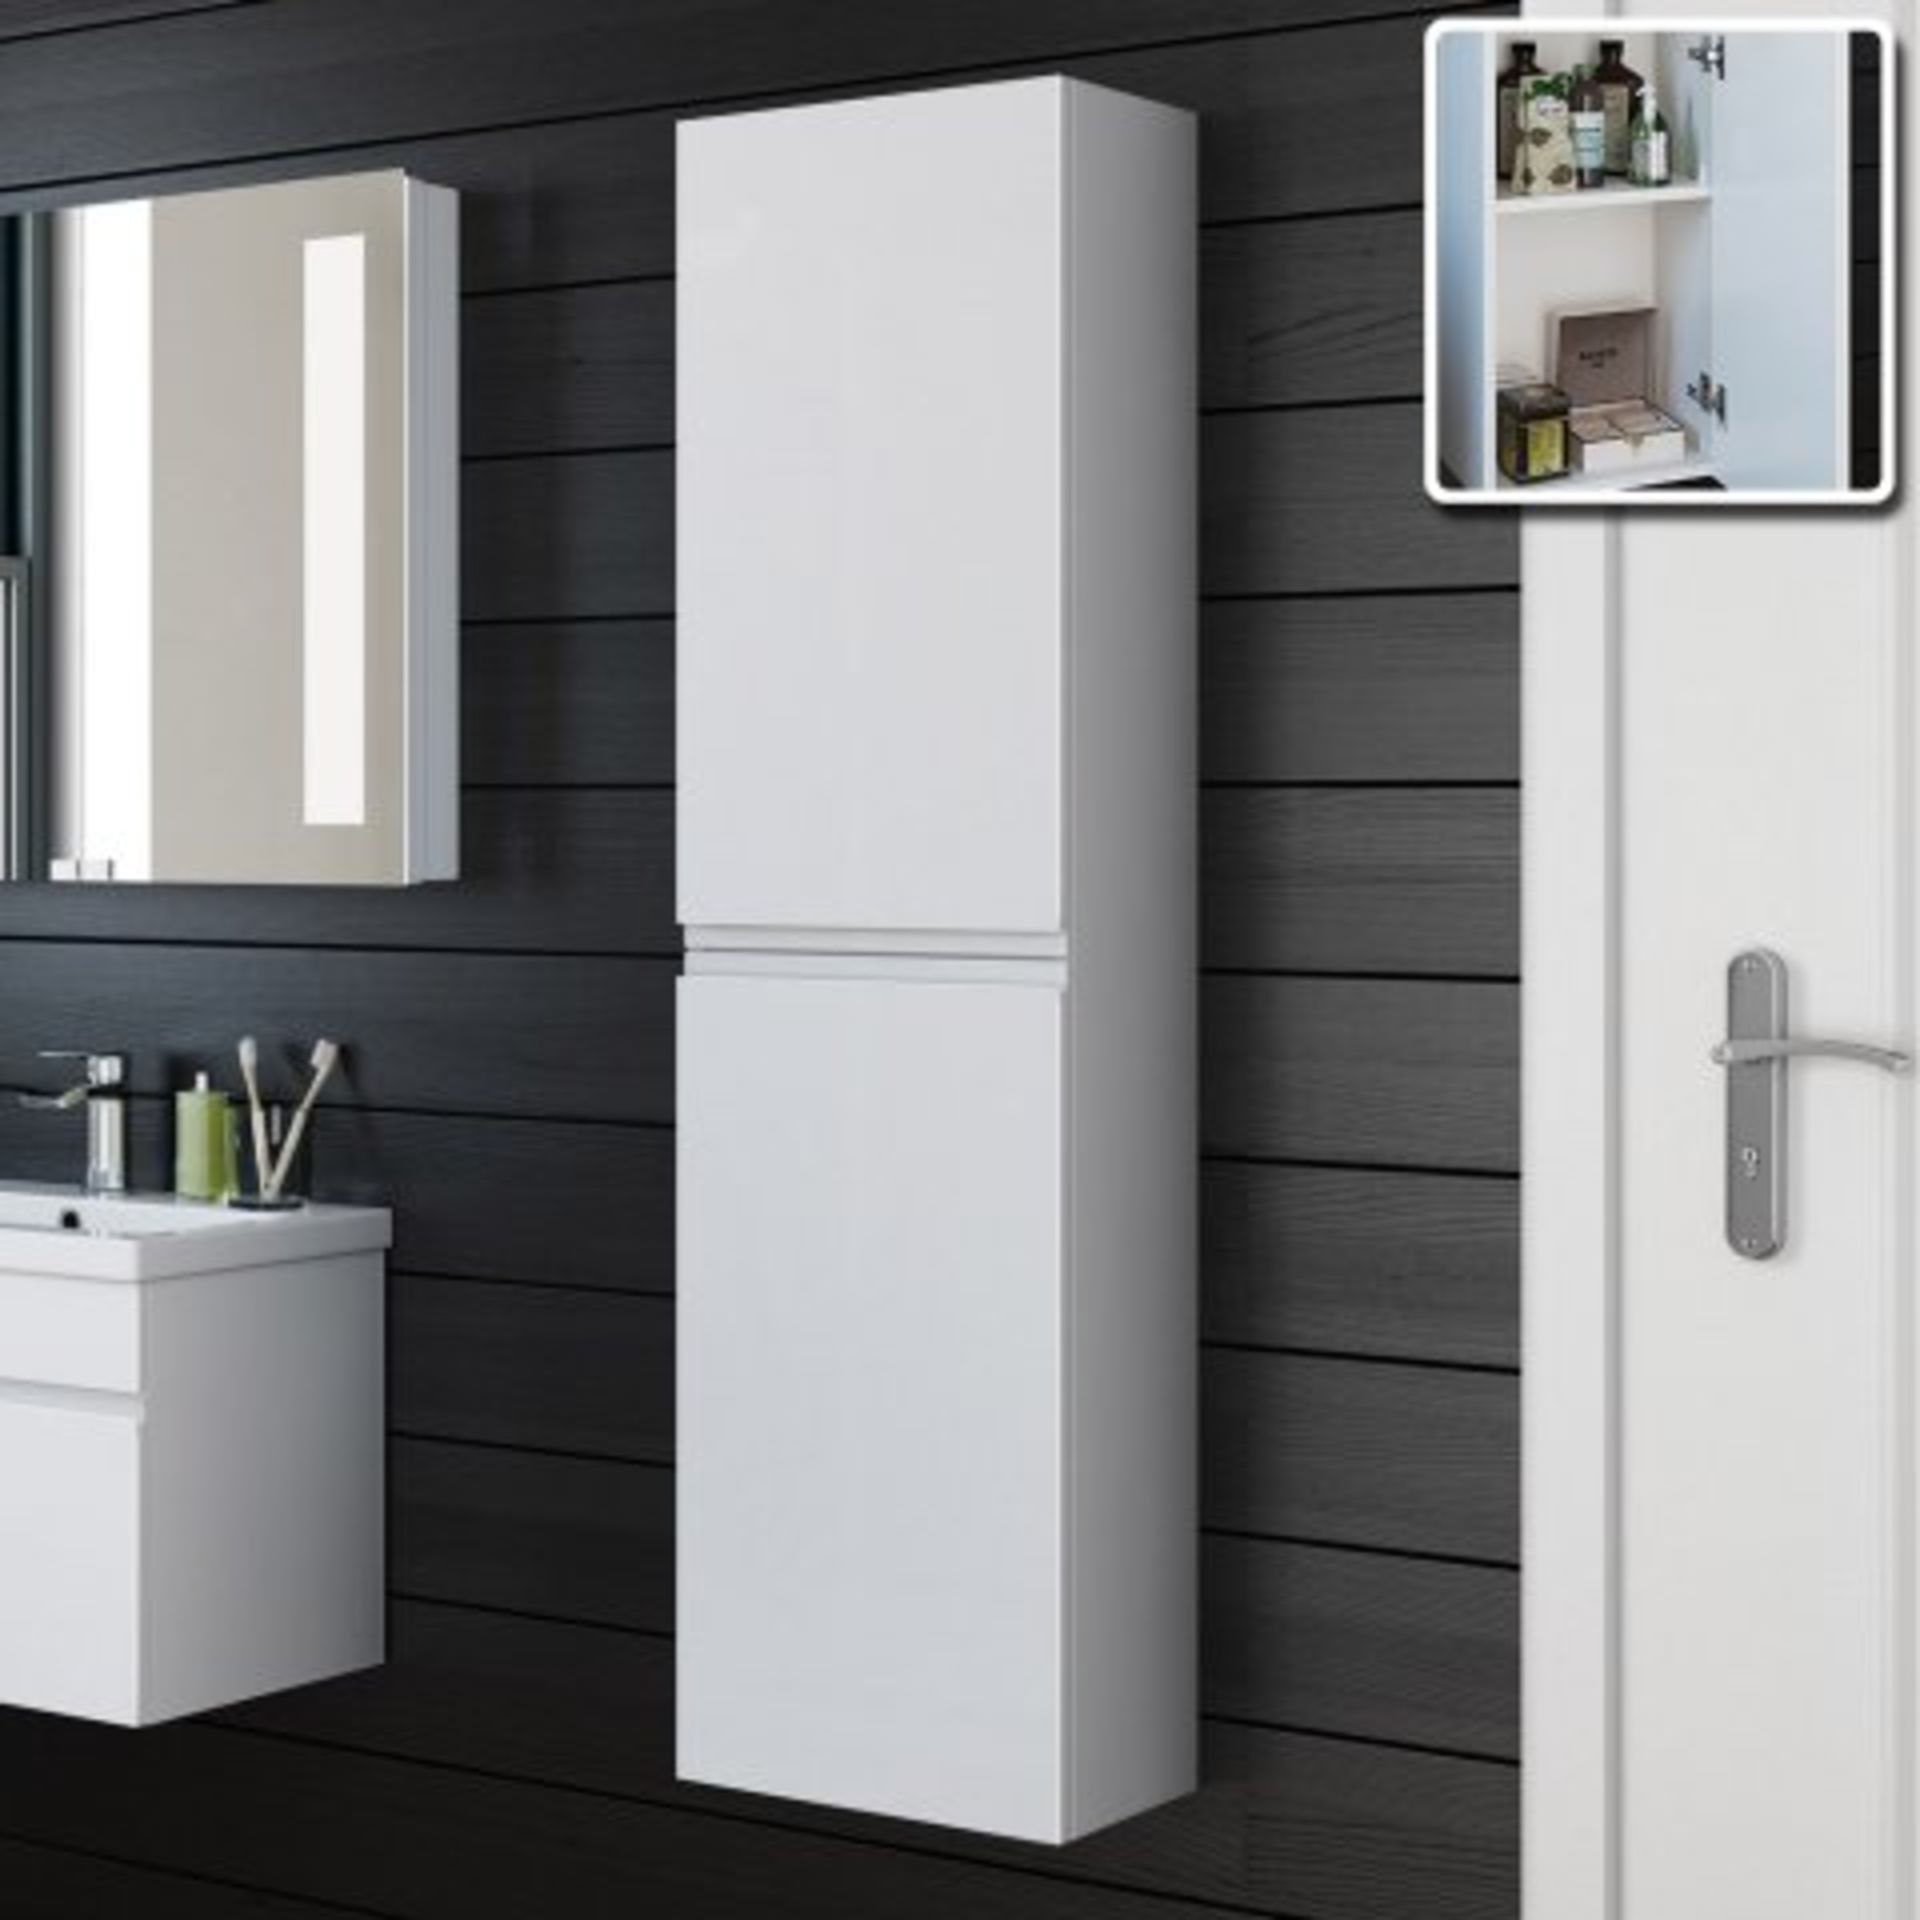 (O36) 1400mm Trent Gloss White Tall Storage Cabinet - Wall Hung. RRP £259.99. Our Trent Gloss